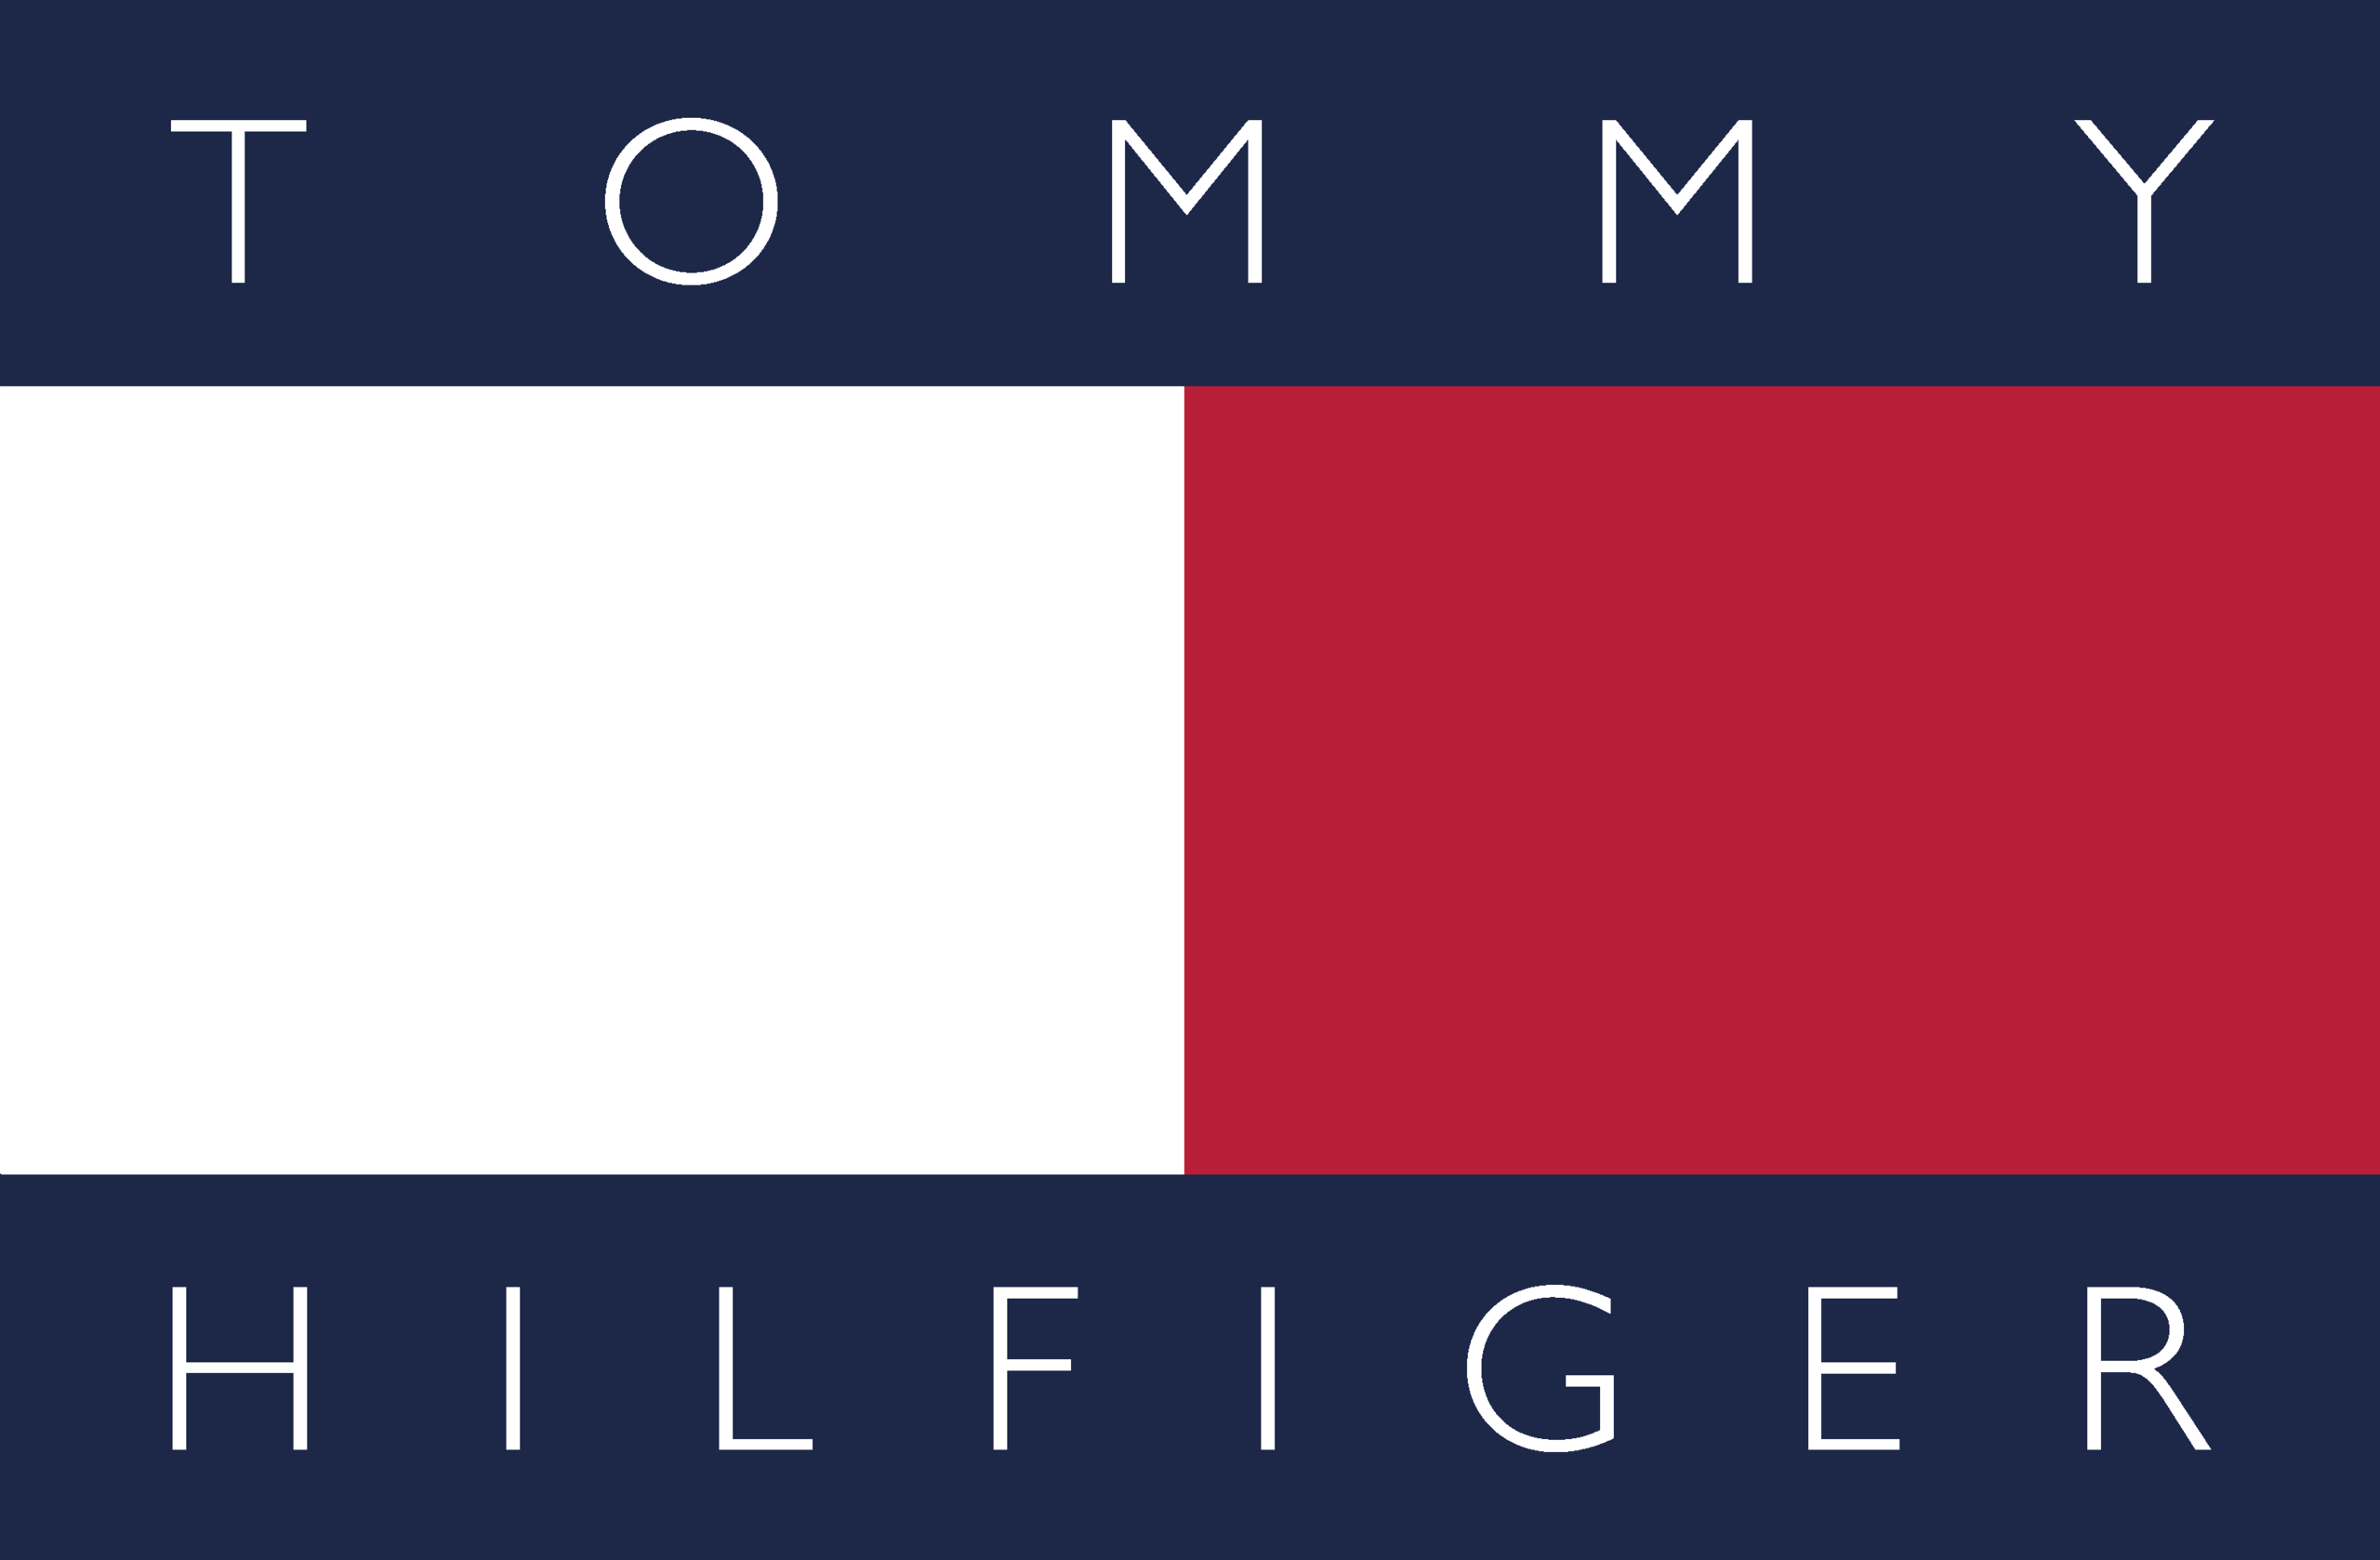 Tommy Hilfiger targets on-the-go consumers with the launch of Tommy Sport